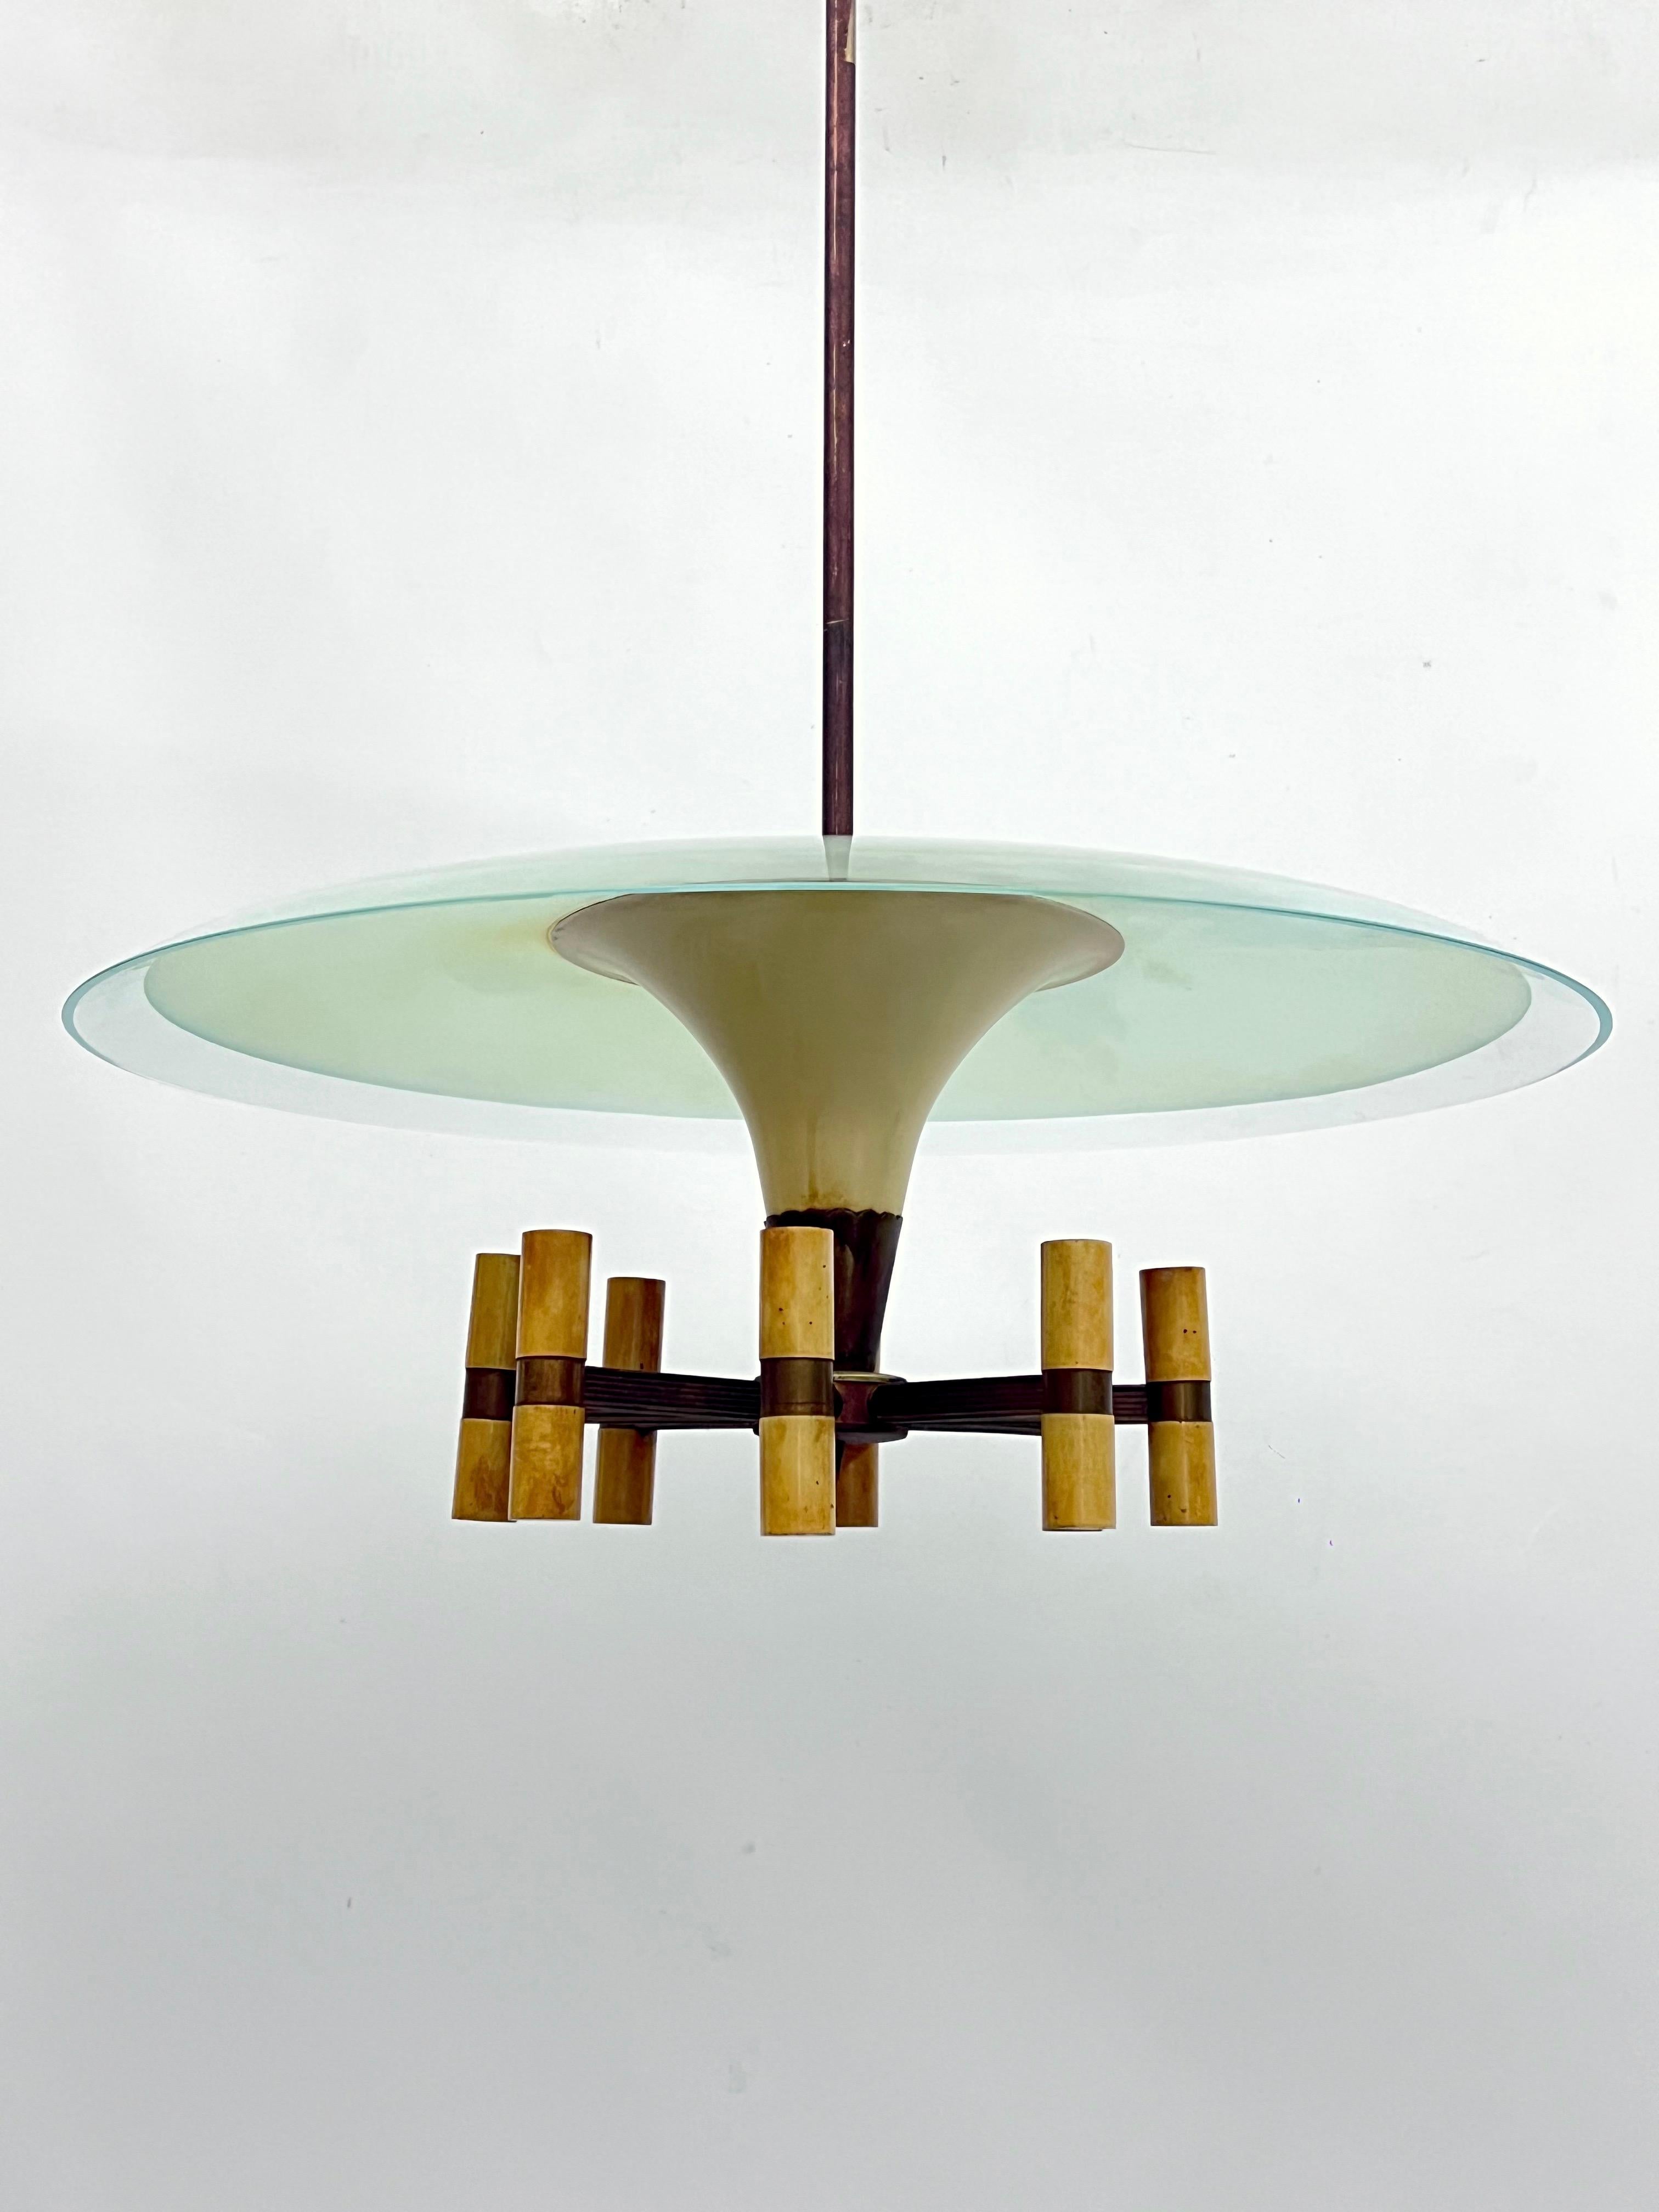 Rare disk chandelier with 8 arms in Fontana Arte  manner produced in Italy during the 50s. Made from brass and laquer with original patina and curved glass. Fair vintage condition with trace of age and use. Some loss of lacquer and oxidation on the